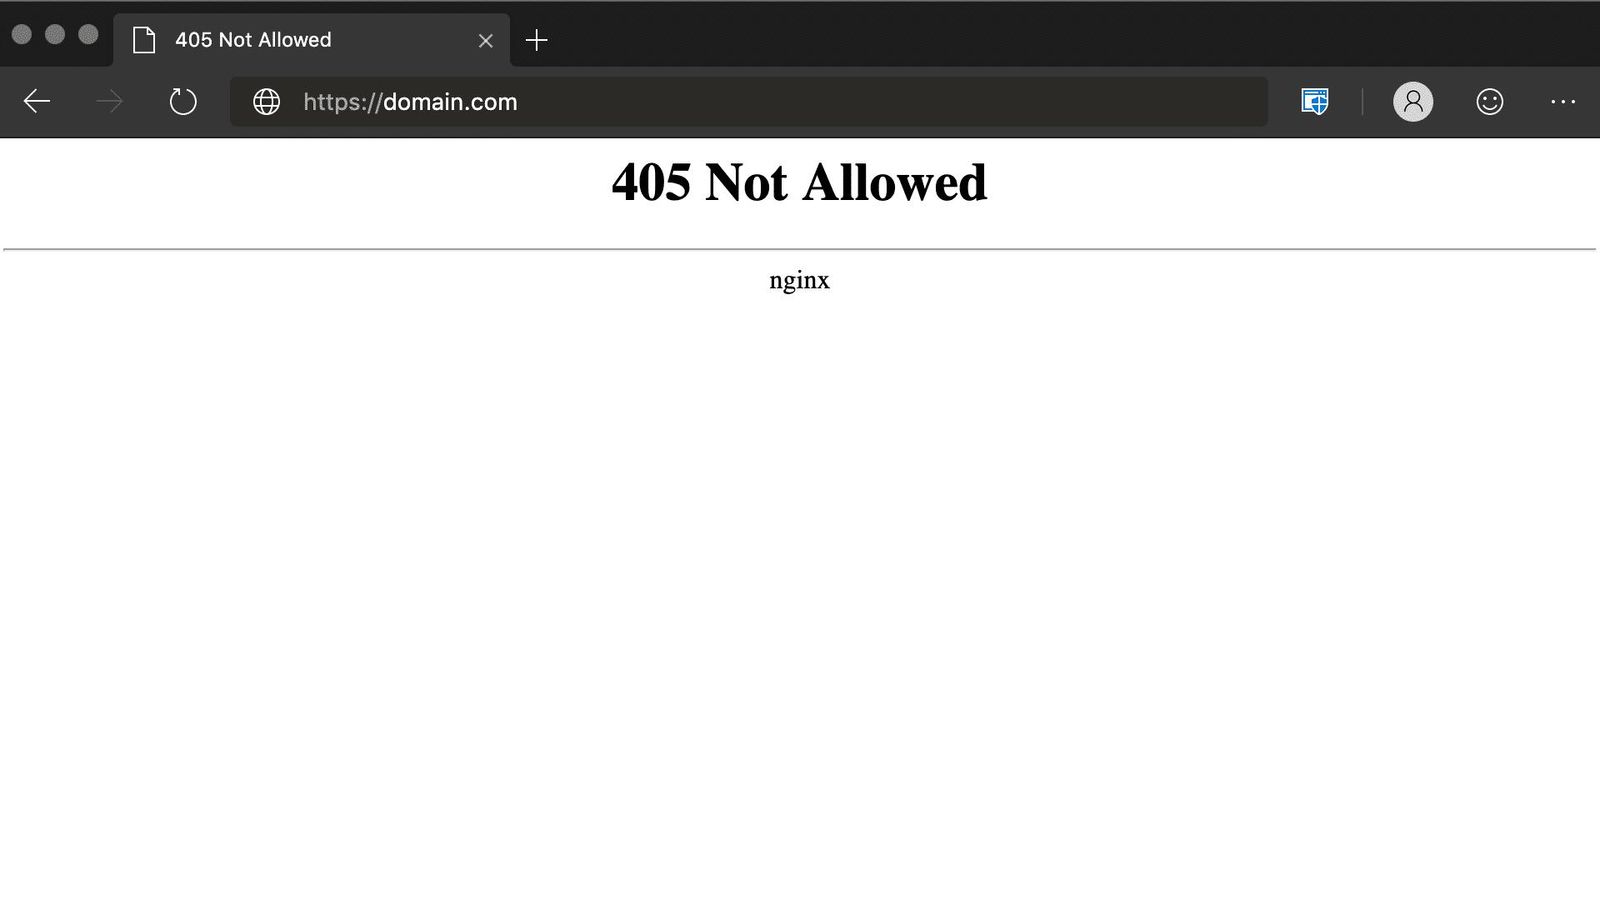 Error 405 being displayed on a browser